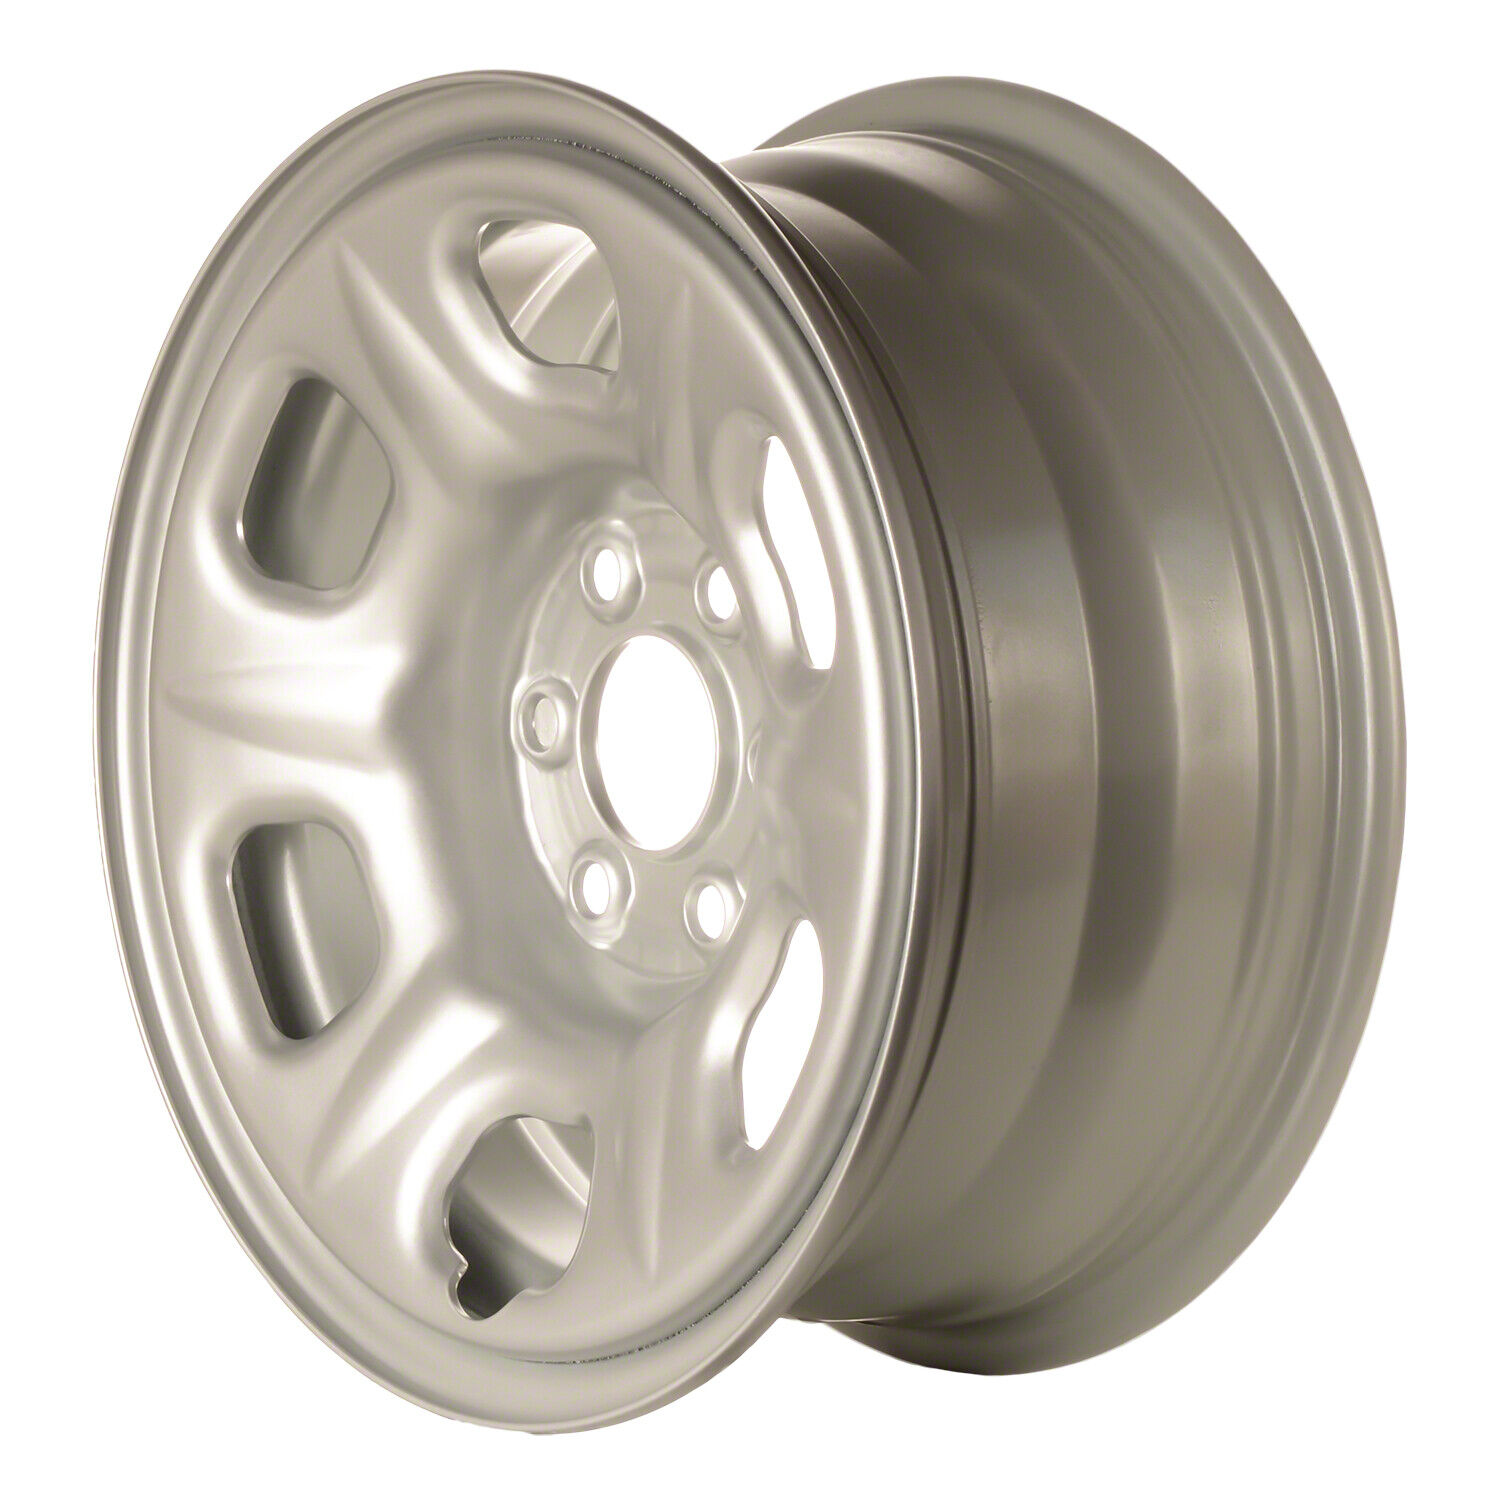 62451 Reconditioned OEM 15x6.5 Silver Steel Wheel fits 2005-2019 Nissan Frontier